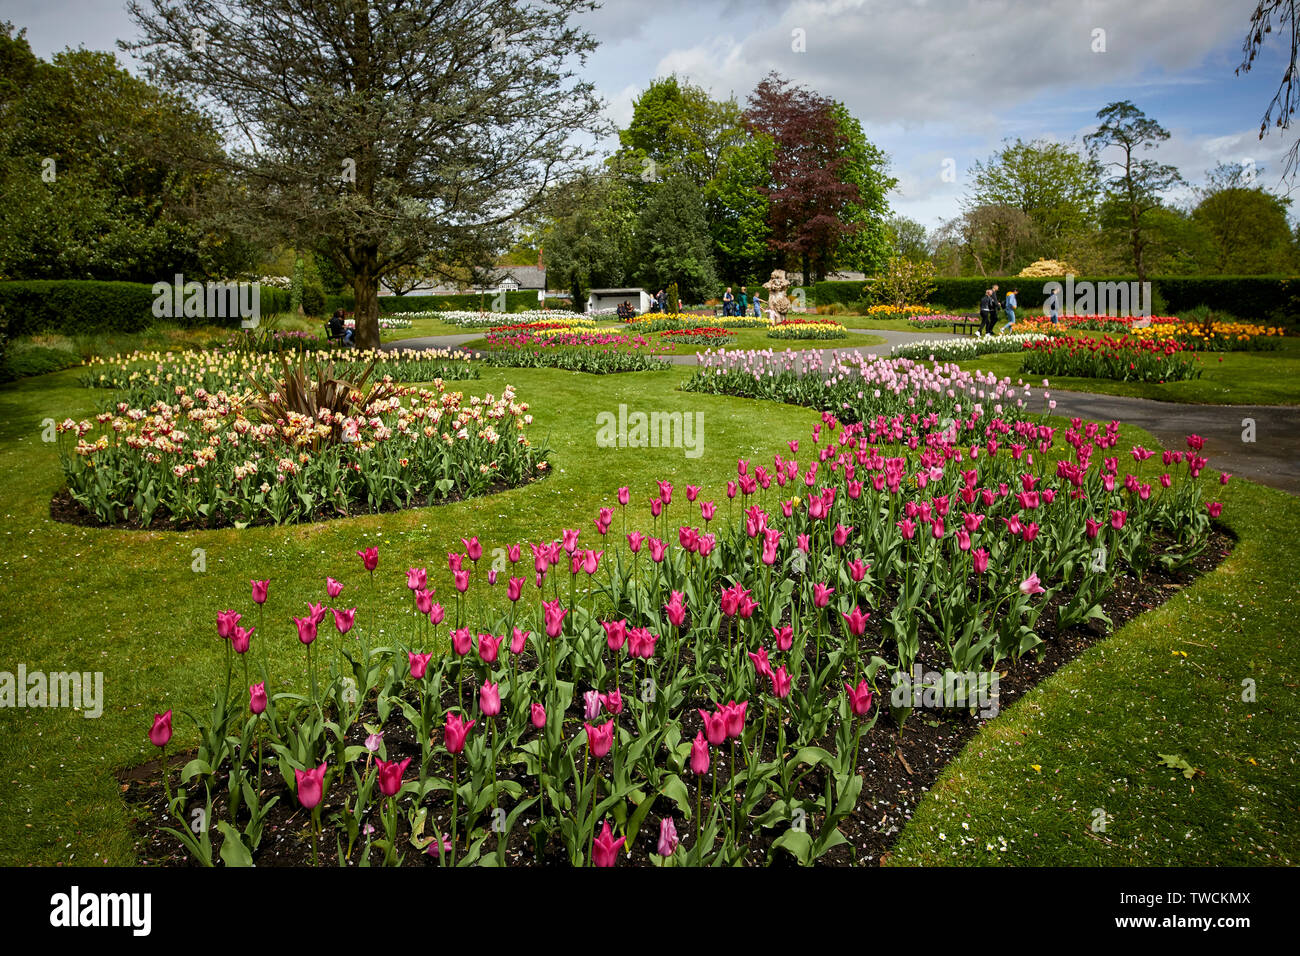 Tulip flower beds in bloom at at Stamford Park in Tameside. Stock Photo